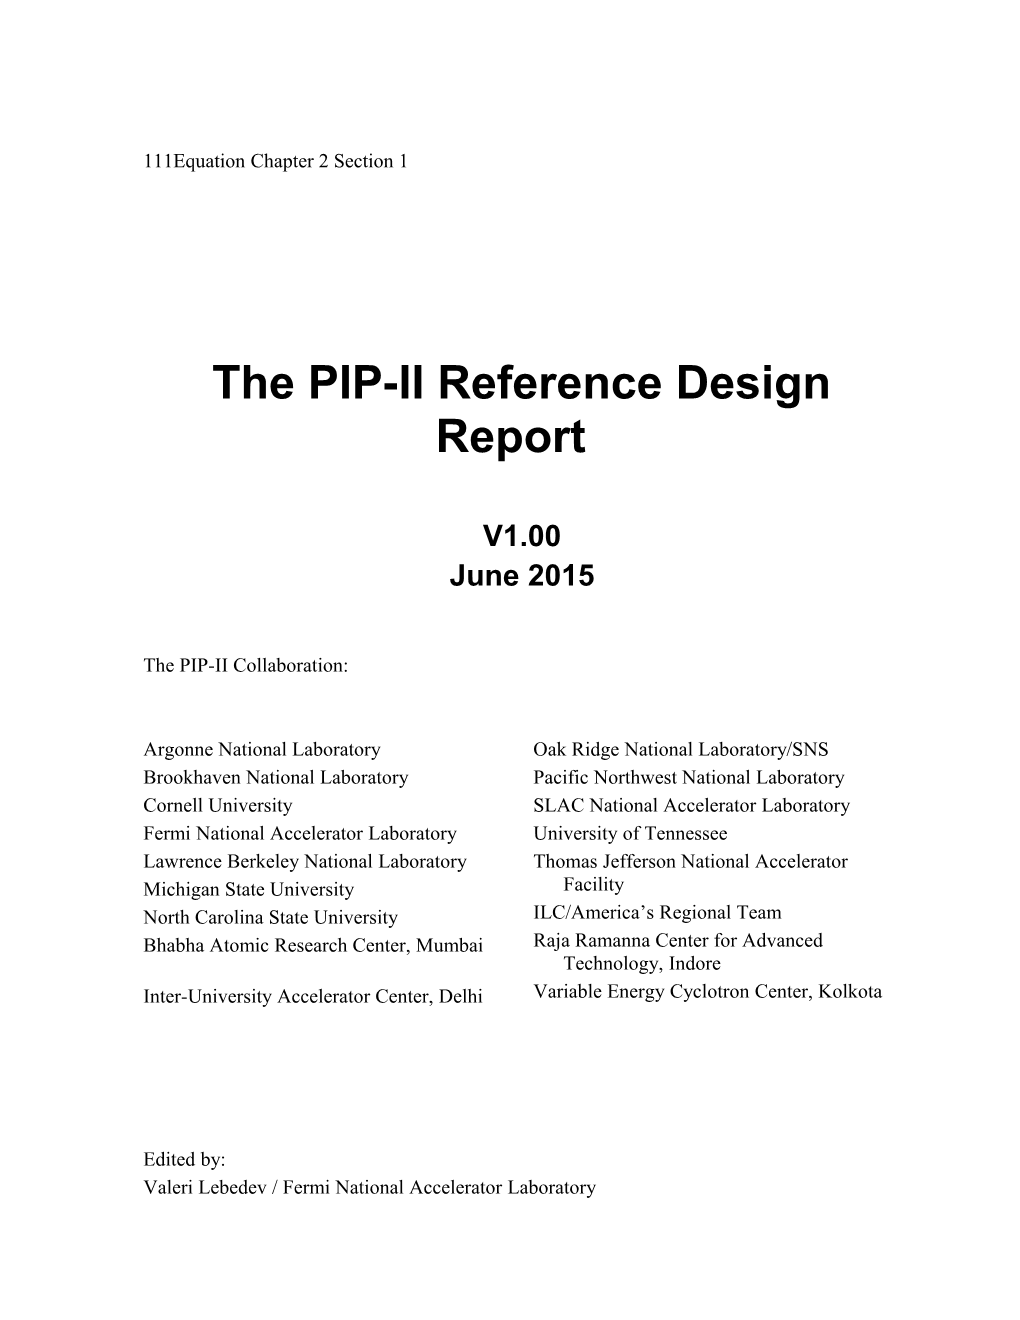 The PIP-II Reference Design Report